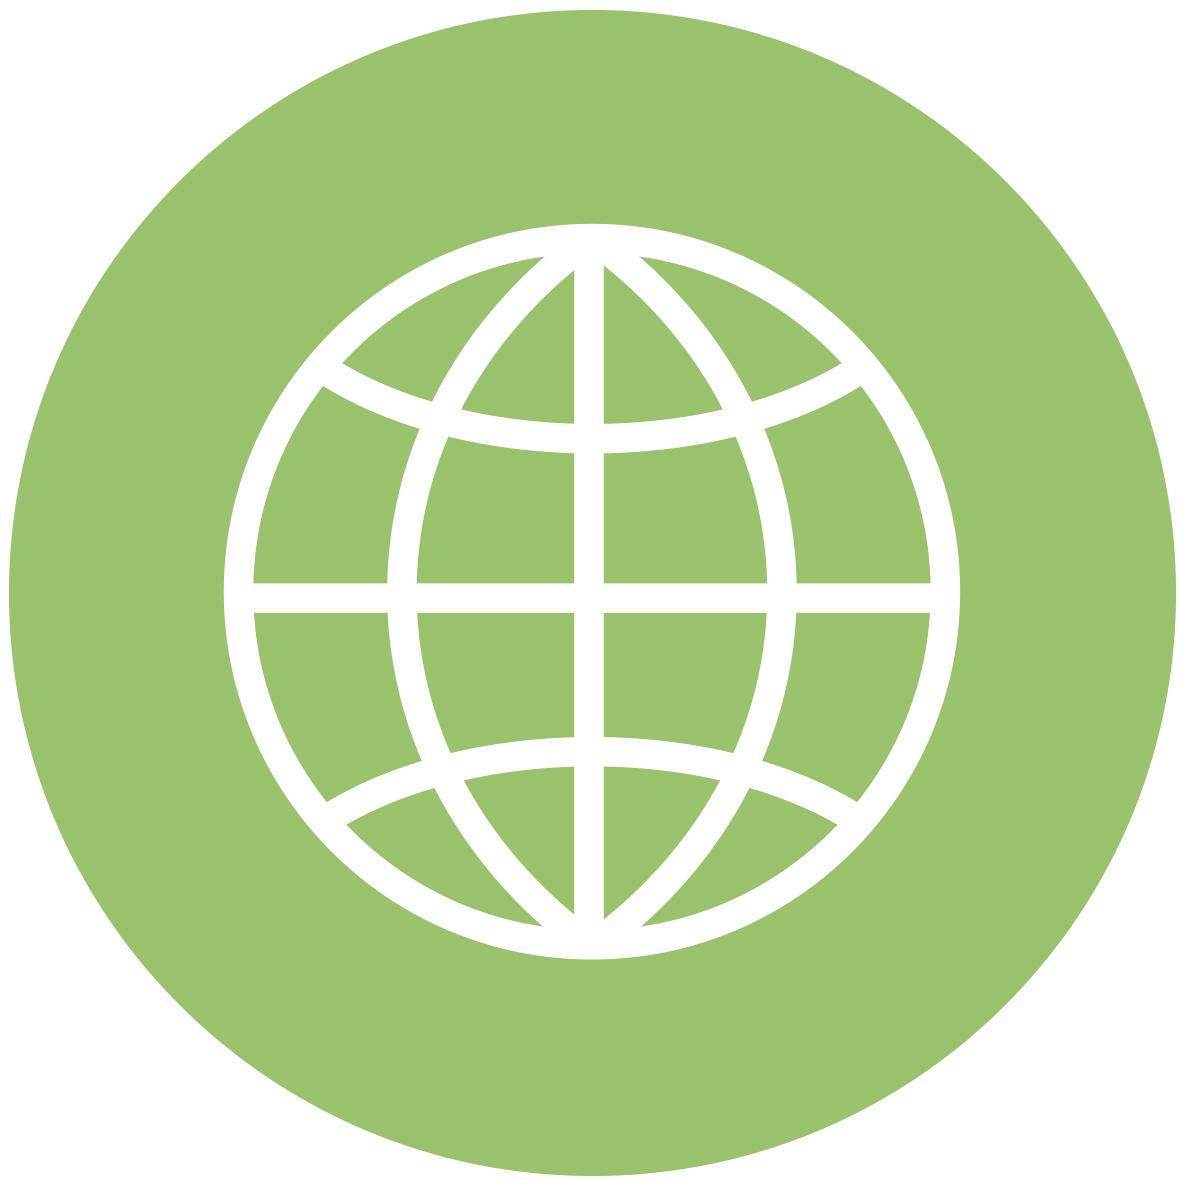 World Wide Web PNG Download Image